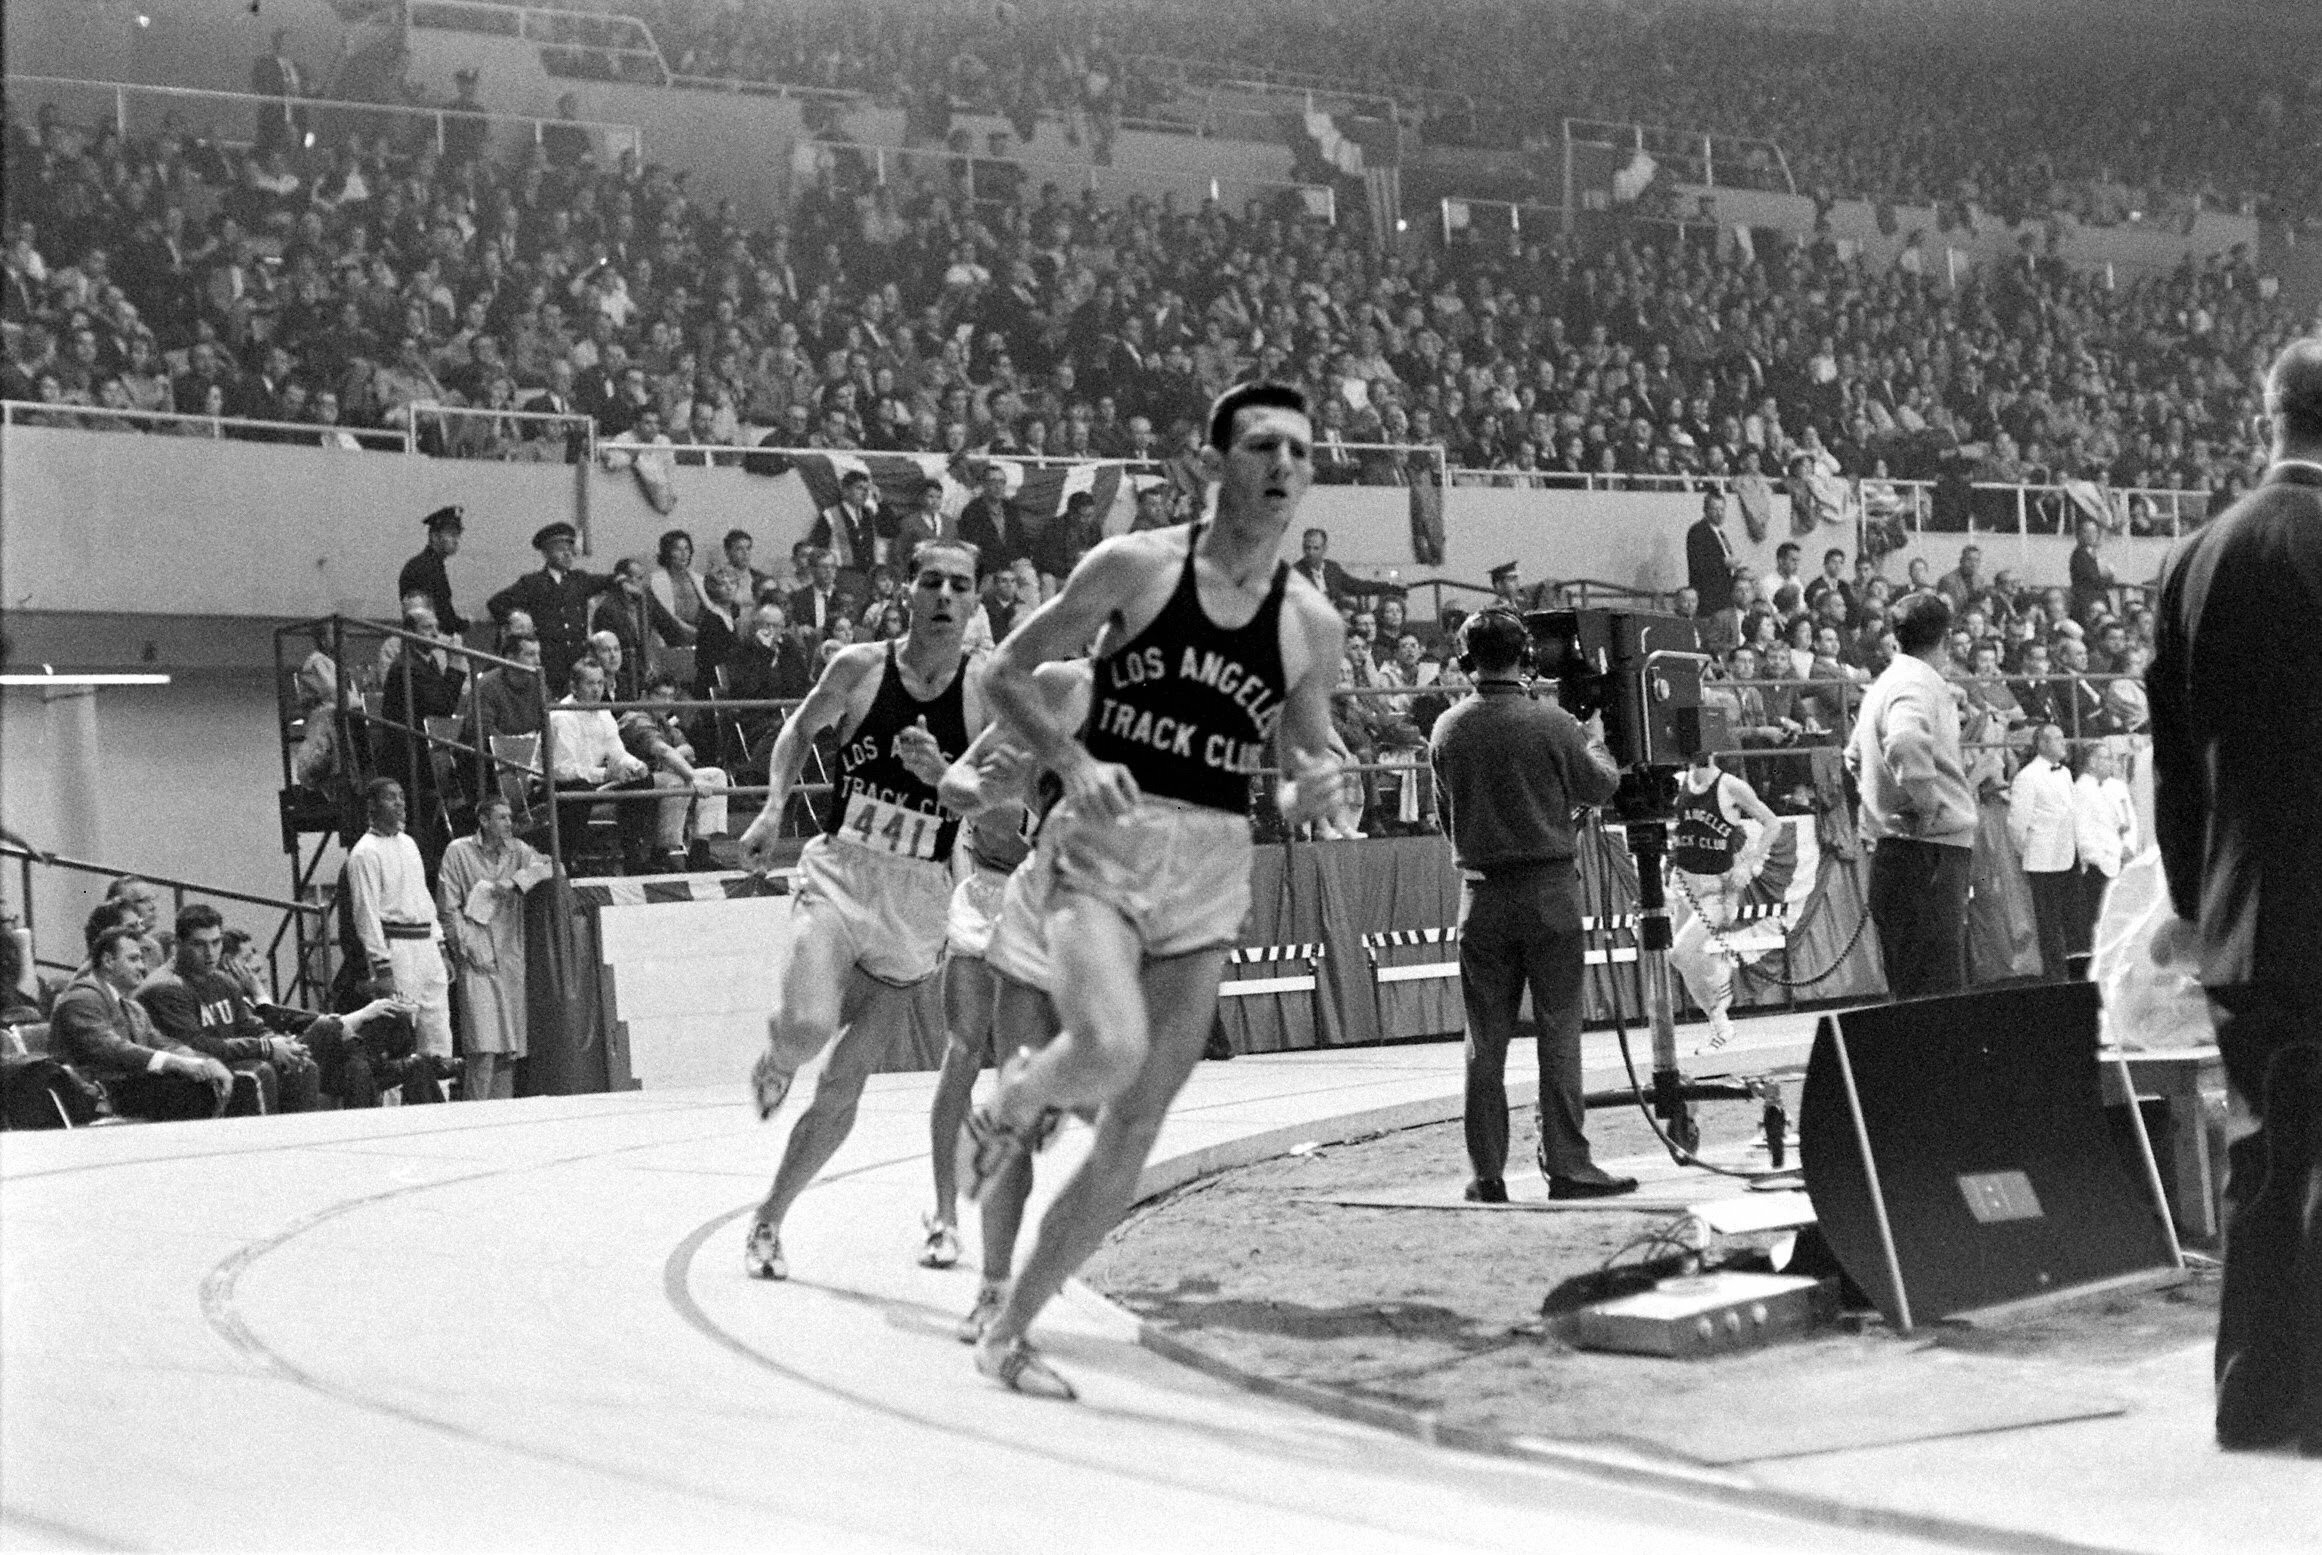  Bob Schul leads the 2-mile race at the Los Angeles Times Indoor Games. 